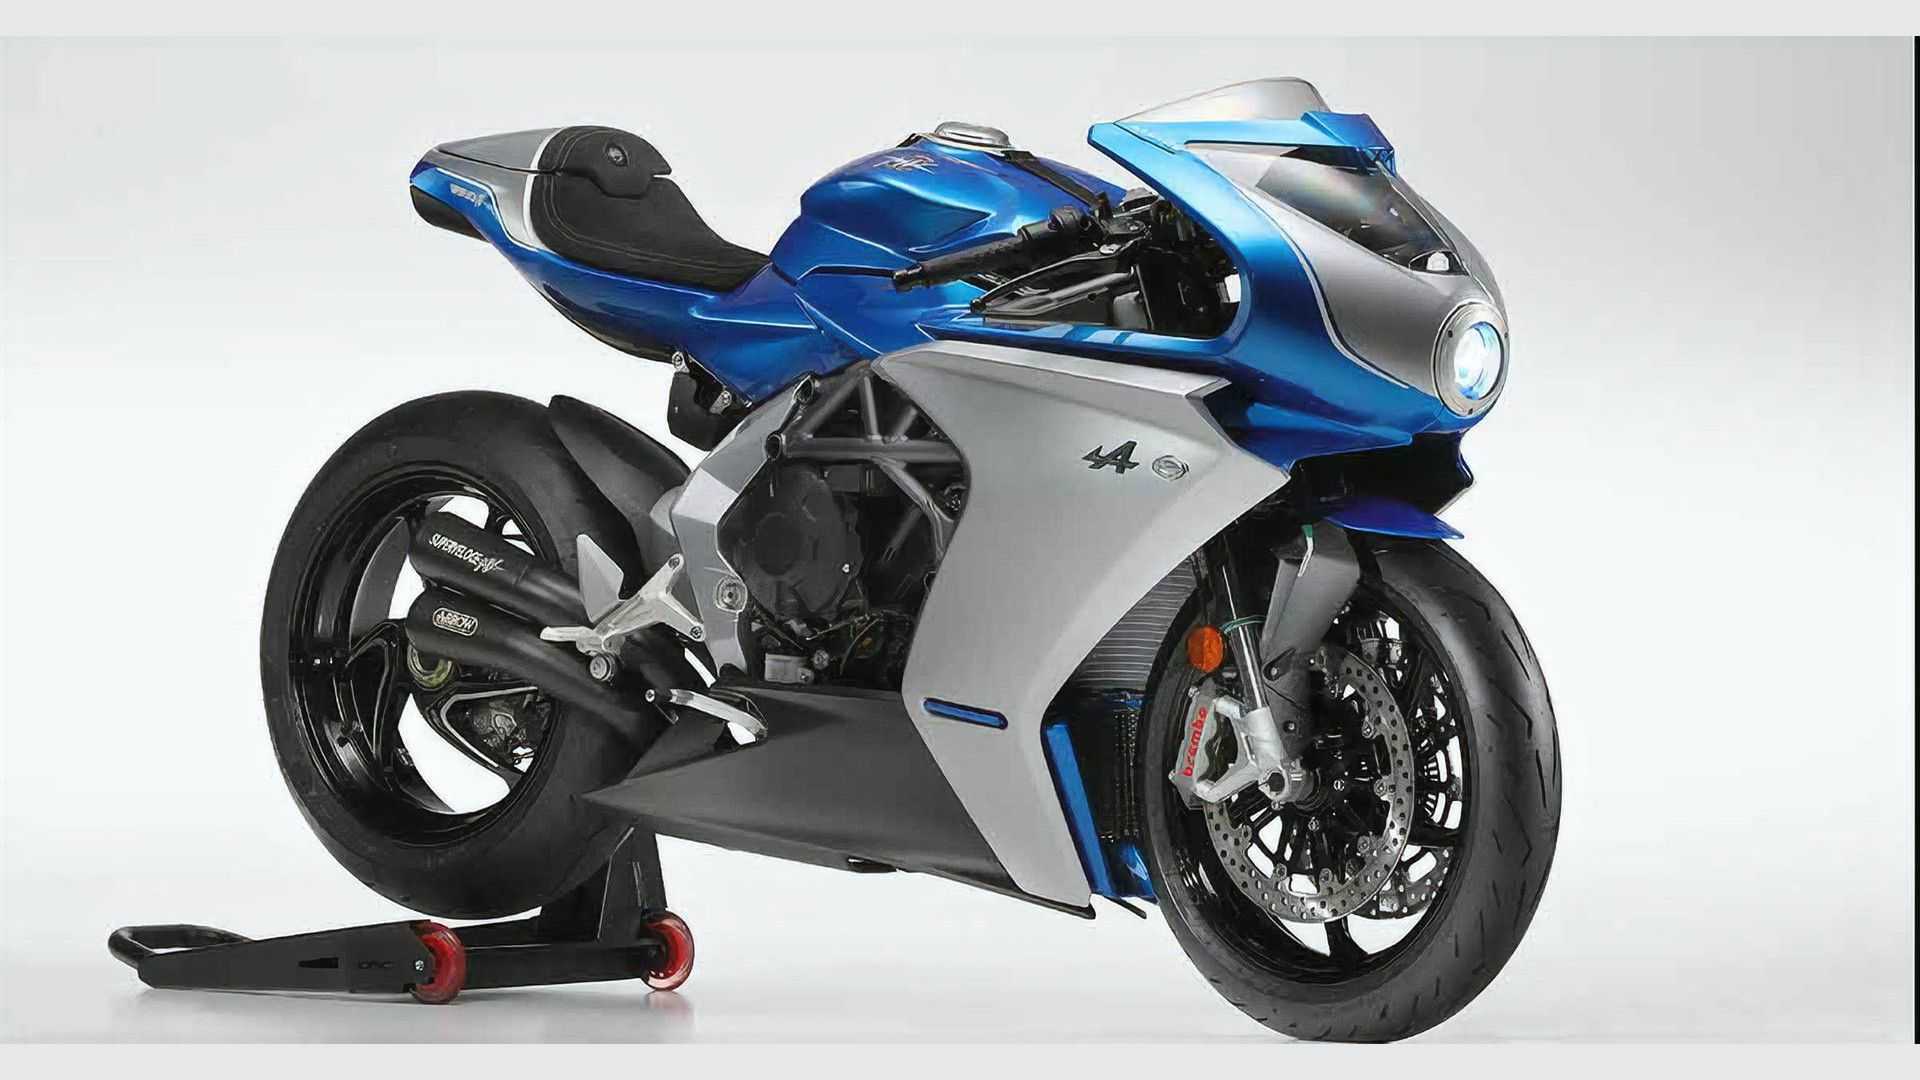 MV Agusta Superveloce Alpine presented
- also in the MOTORCYCLES.NEWS APP